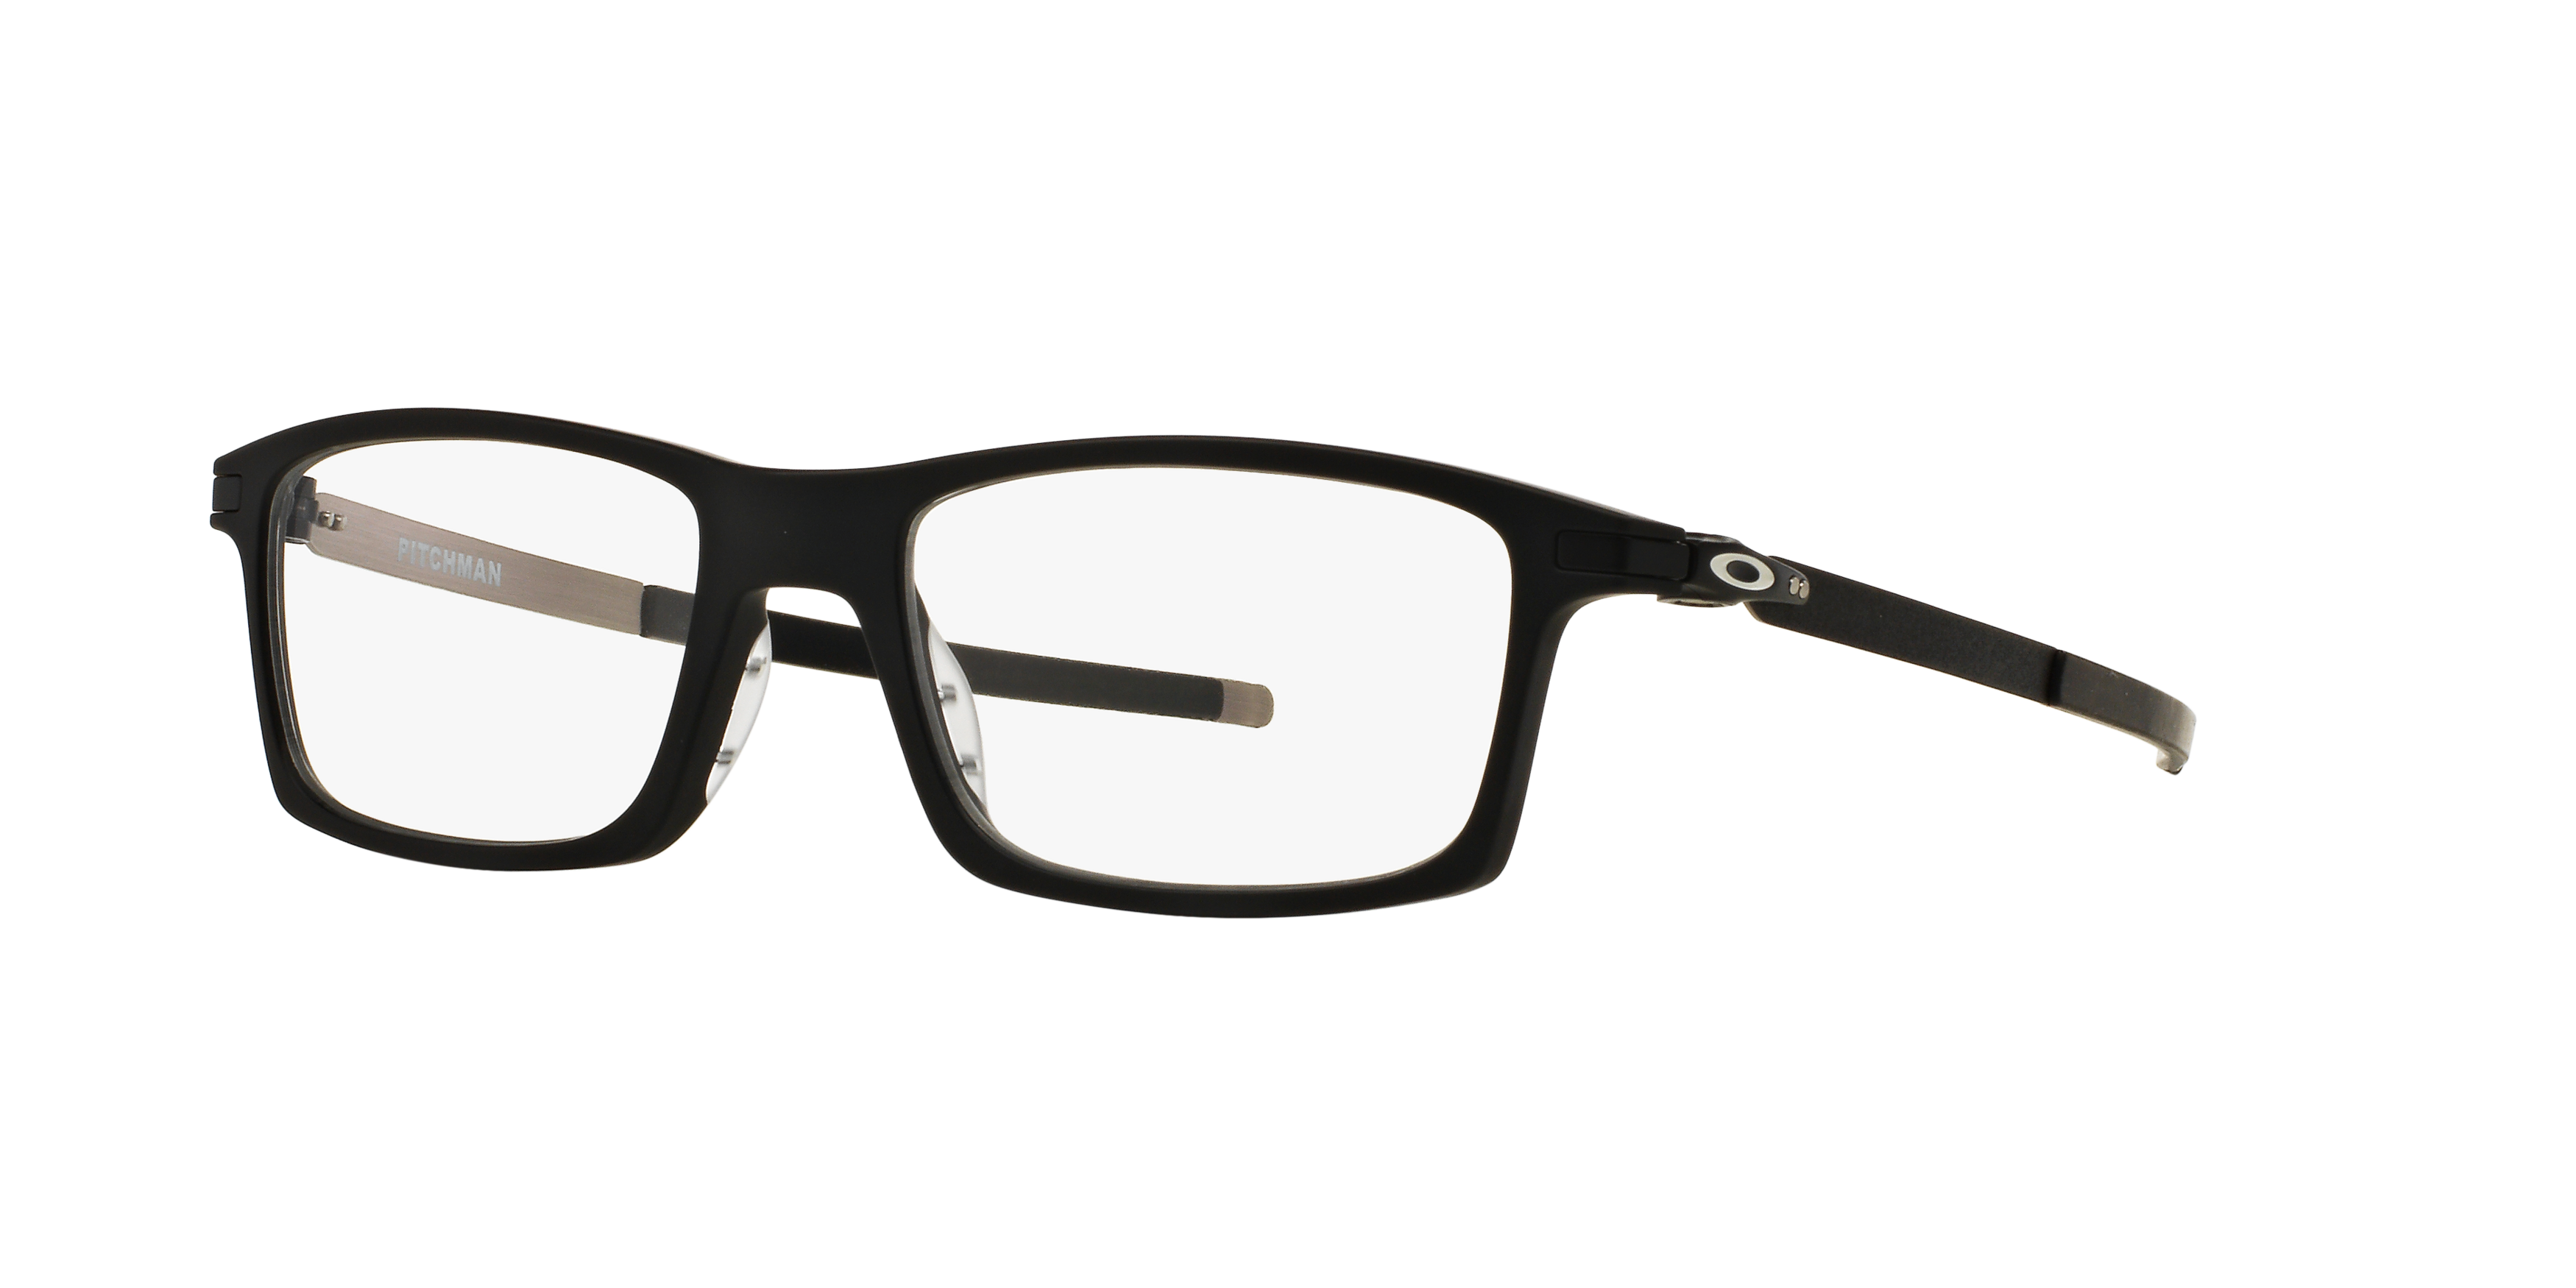 Angle_Left01 Oakley Pitchman OX 8050 Glasses Transparent / Grey